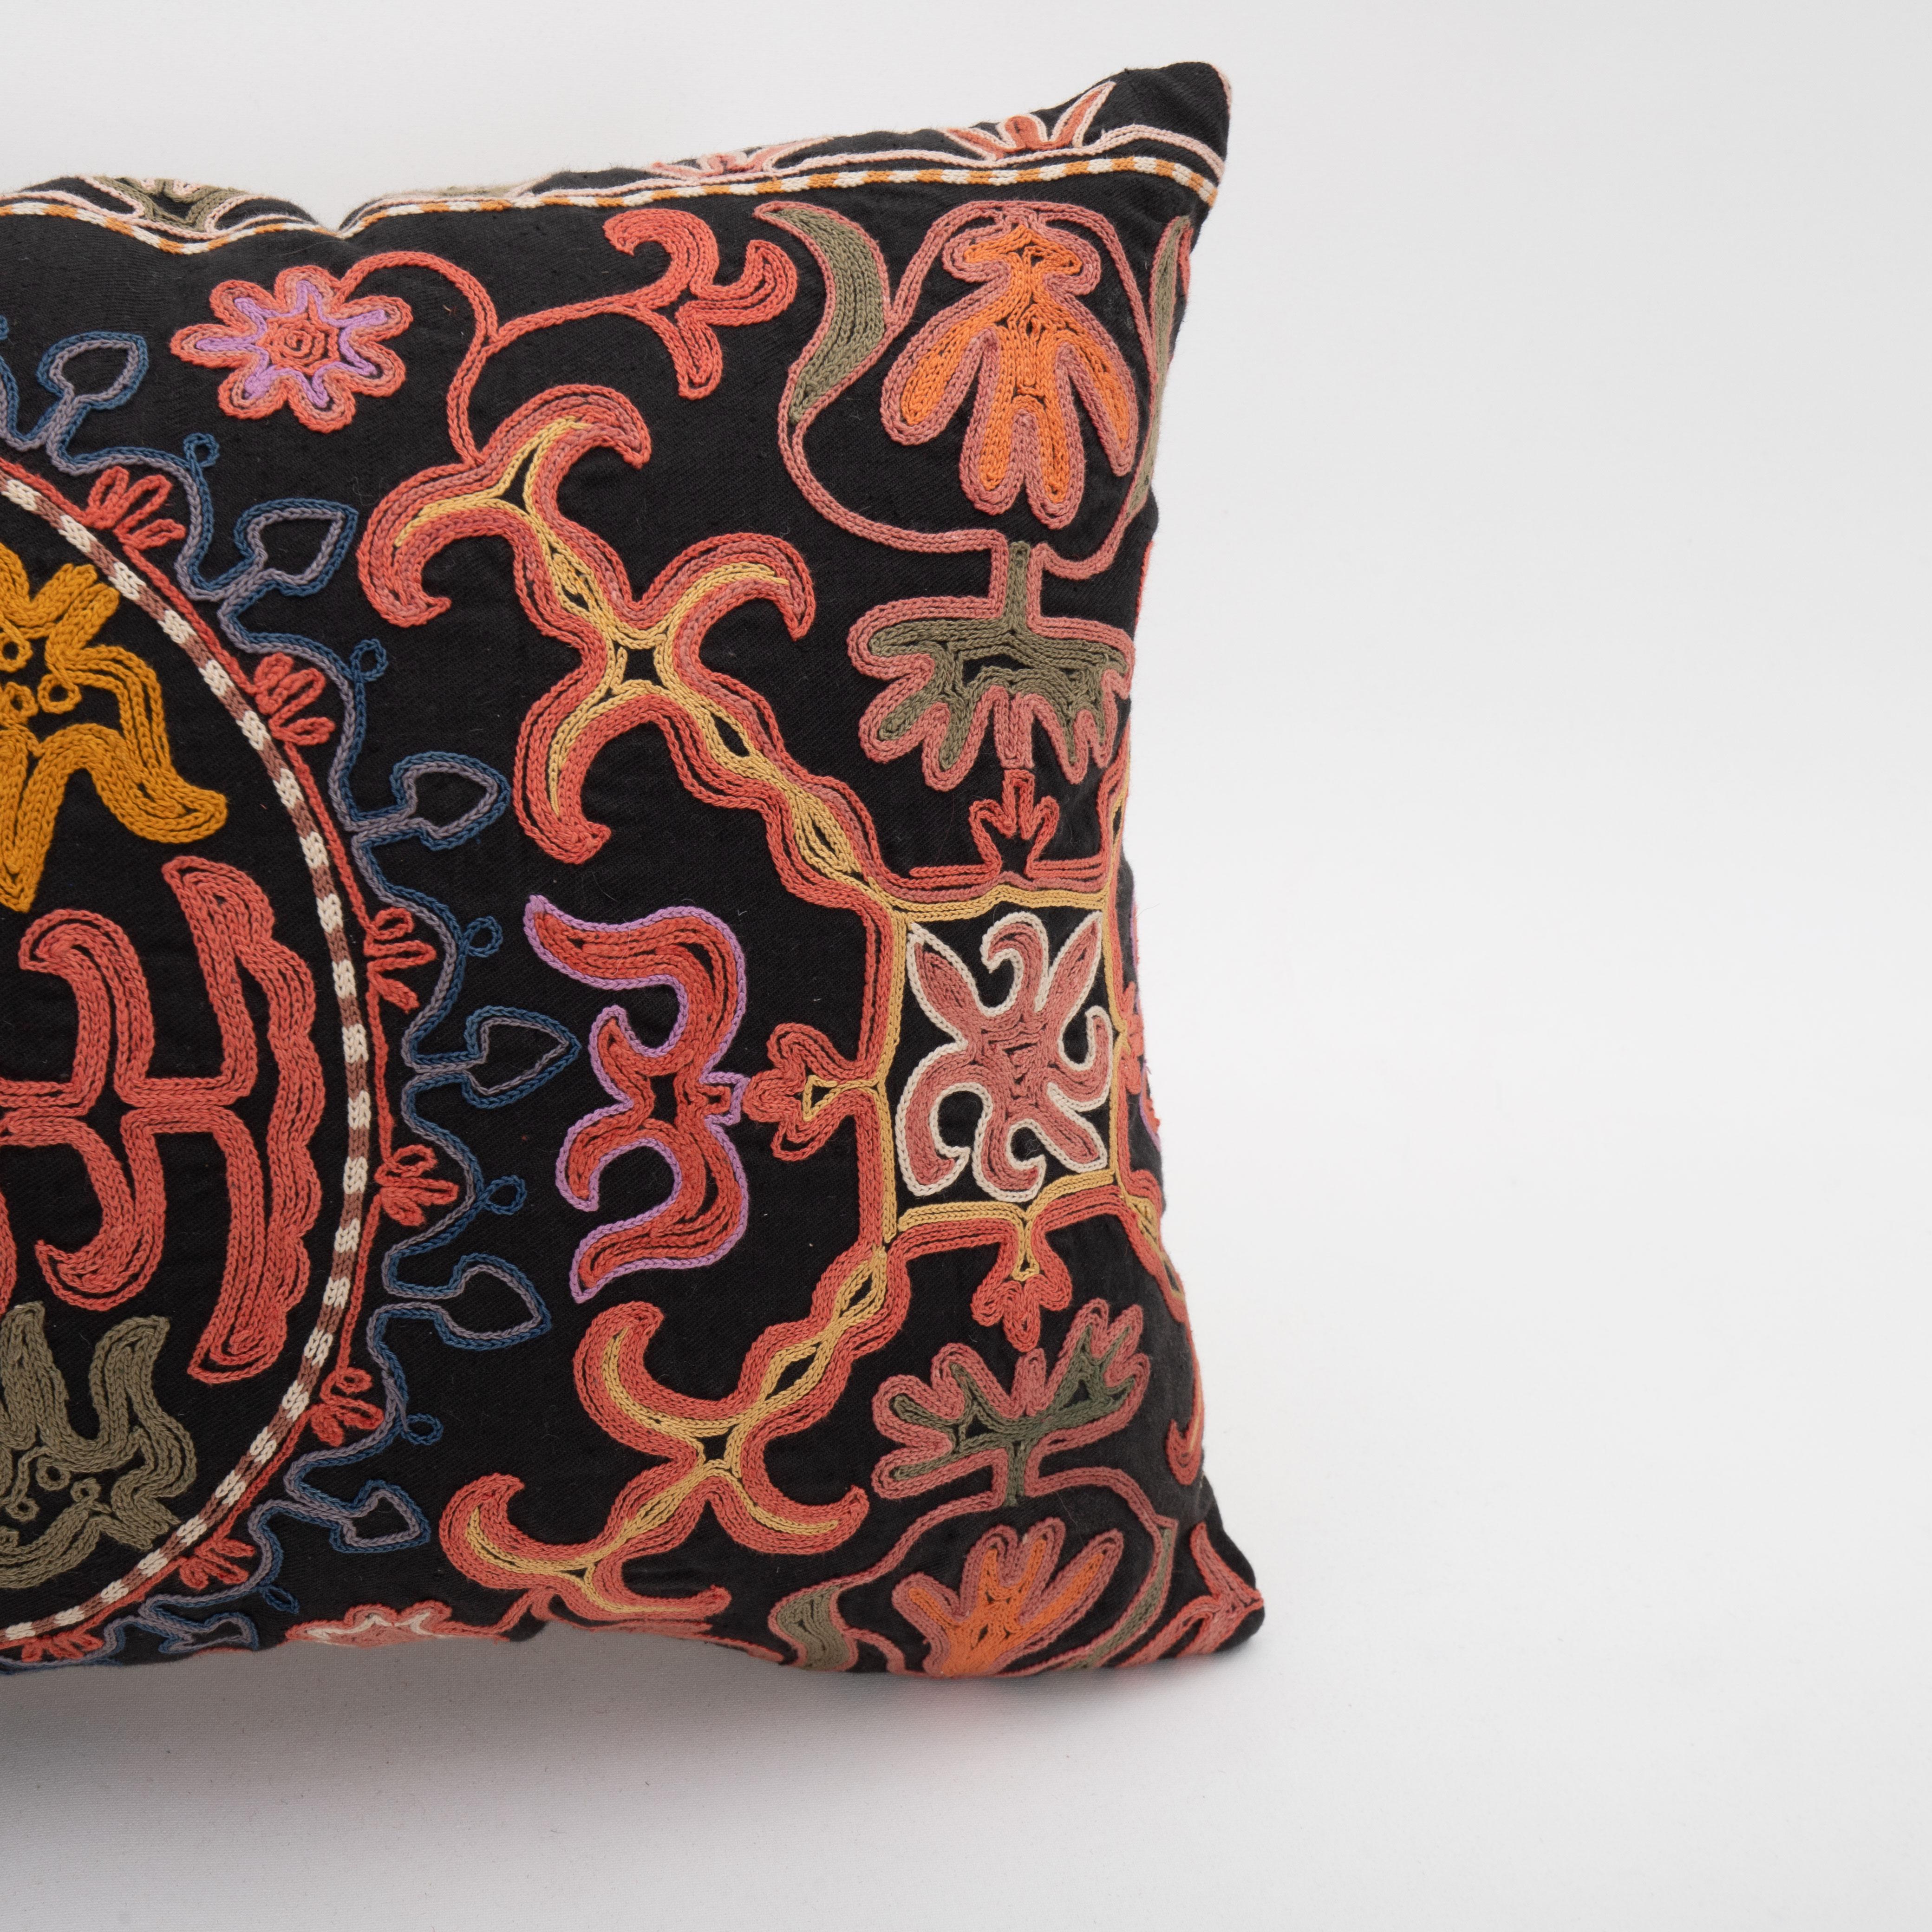 Kazakhstani Pillowcase made from a mid 20th. C. Kazakh / Kyrgyz Embroidery For Sale